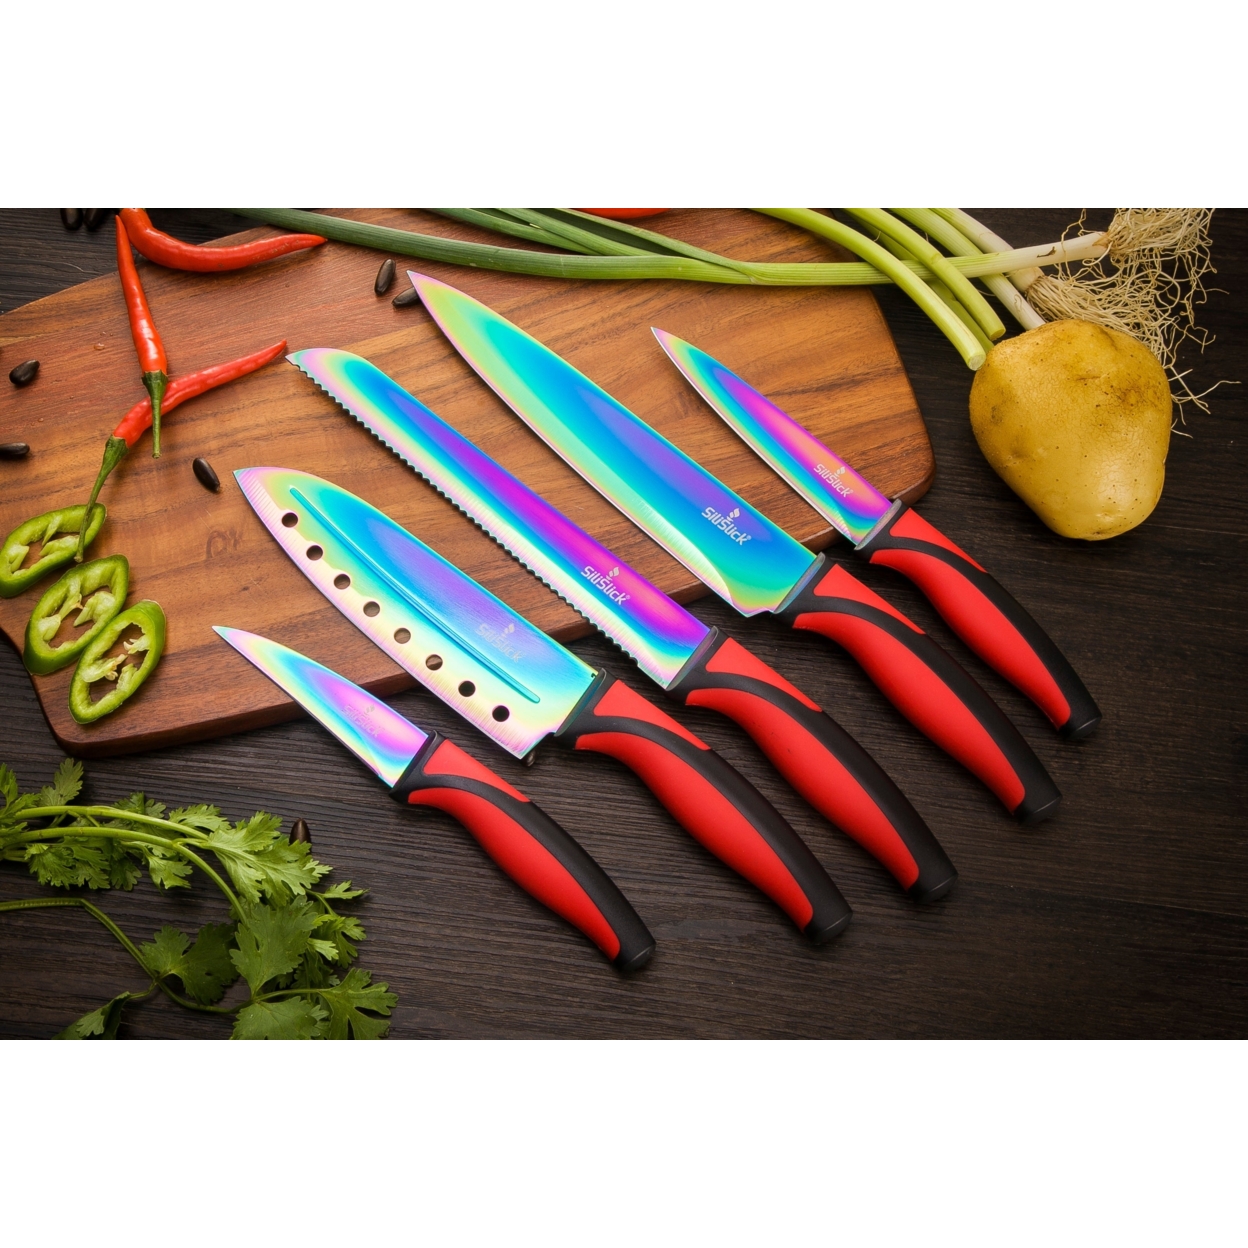 SiliSlick Stainless Steel Red Handle Knife Set - Titanium Coated Stainless Steel Kitchen Utility Knife, Santoku, Bread, Chef, & Paring